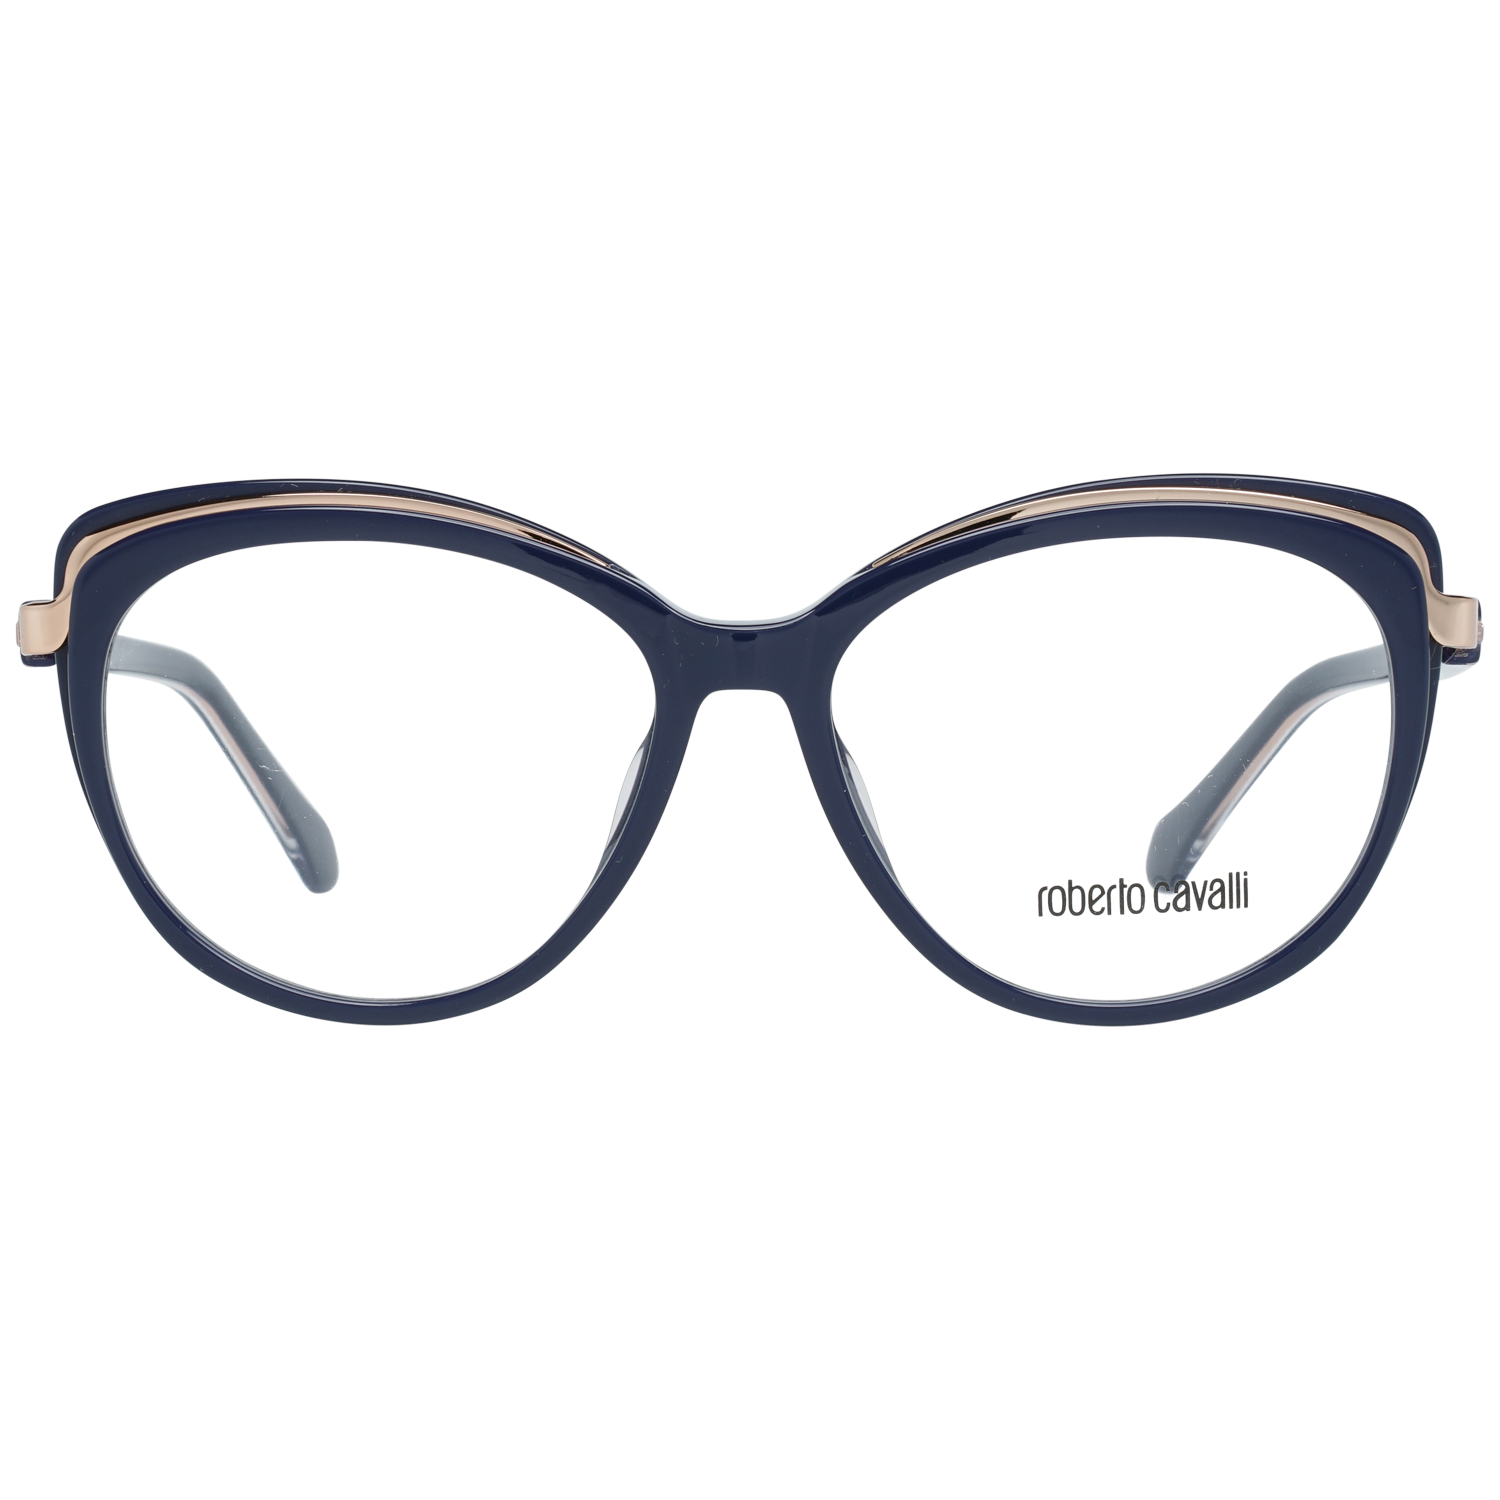 Roberto Cavalli Optical Frame RC5077 090 55 from category Frames